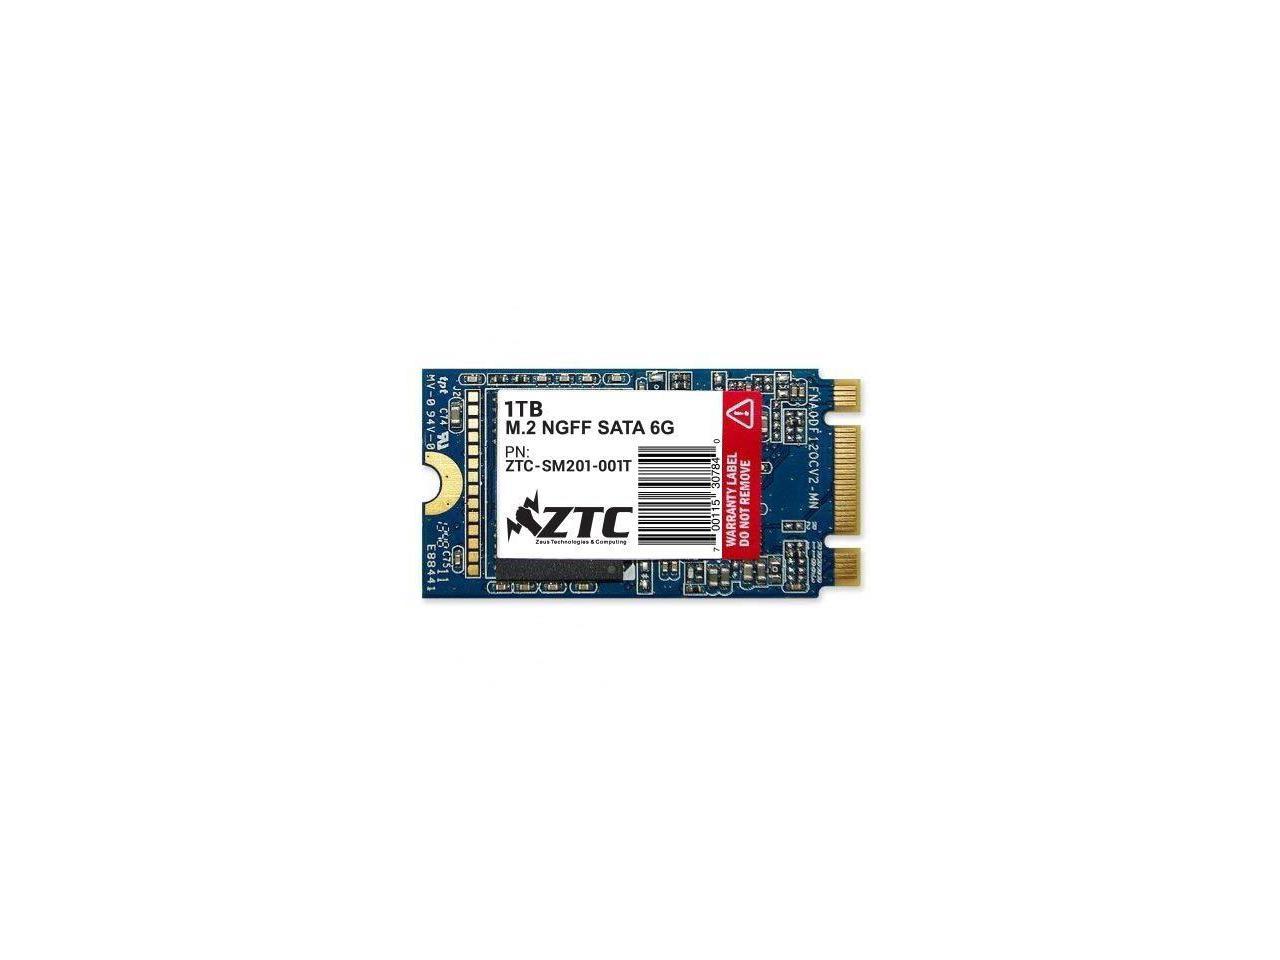 ZTC 1TB Armor 42mm M.2 NGFF 6G SSD Solid State Drive. Model ZTC-SM201-001T